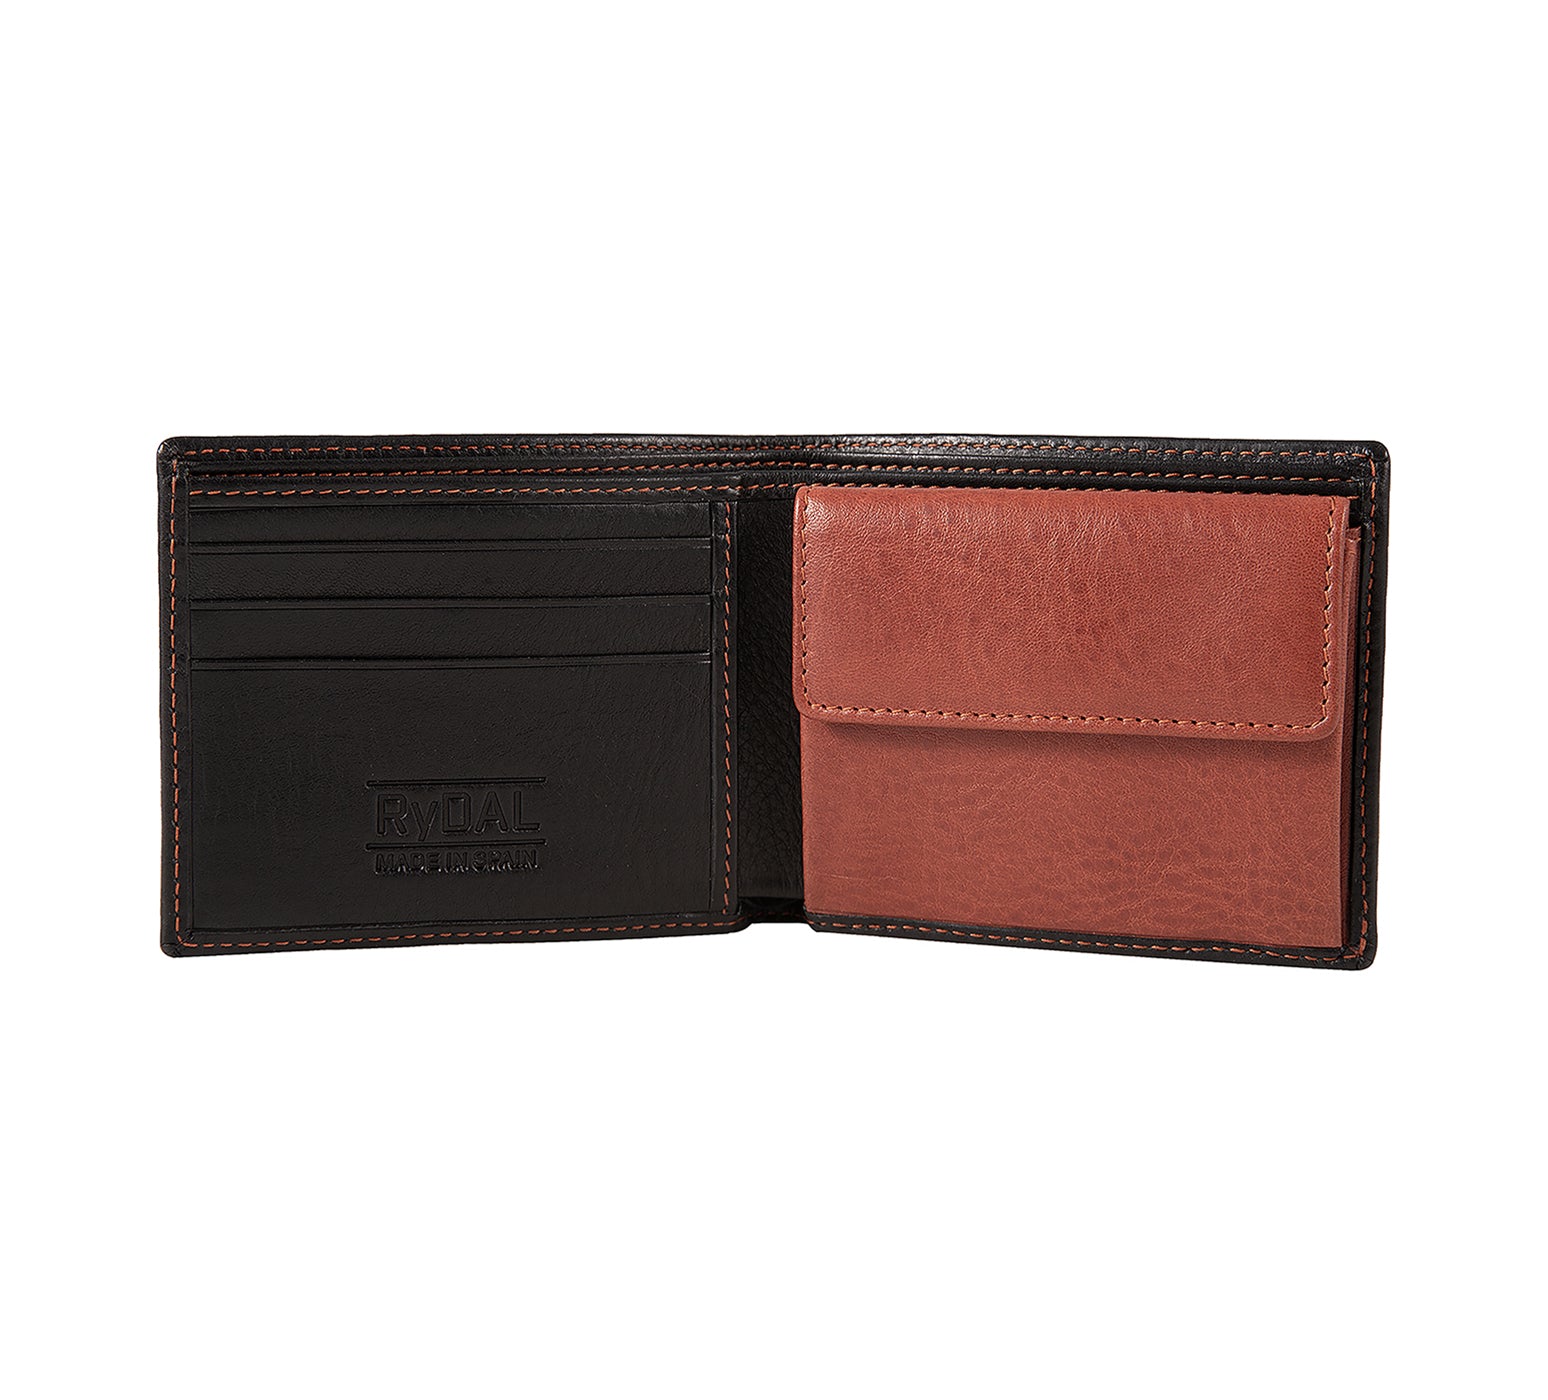 Mens Leather Wallet with Coin Pocket from Rydal in 'Black/Rust' showing interior.